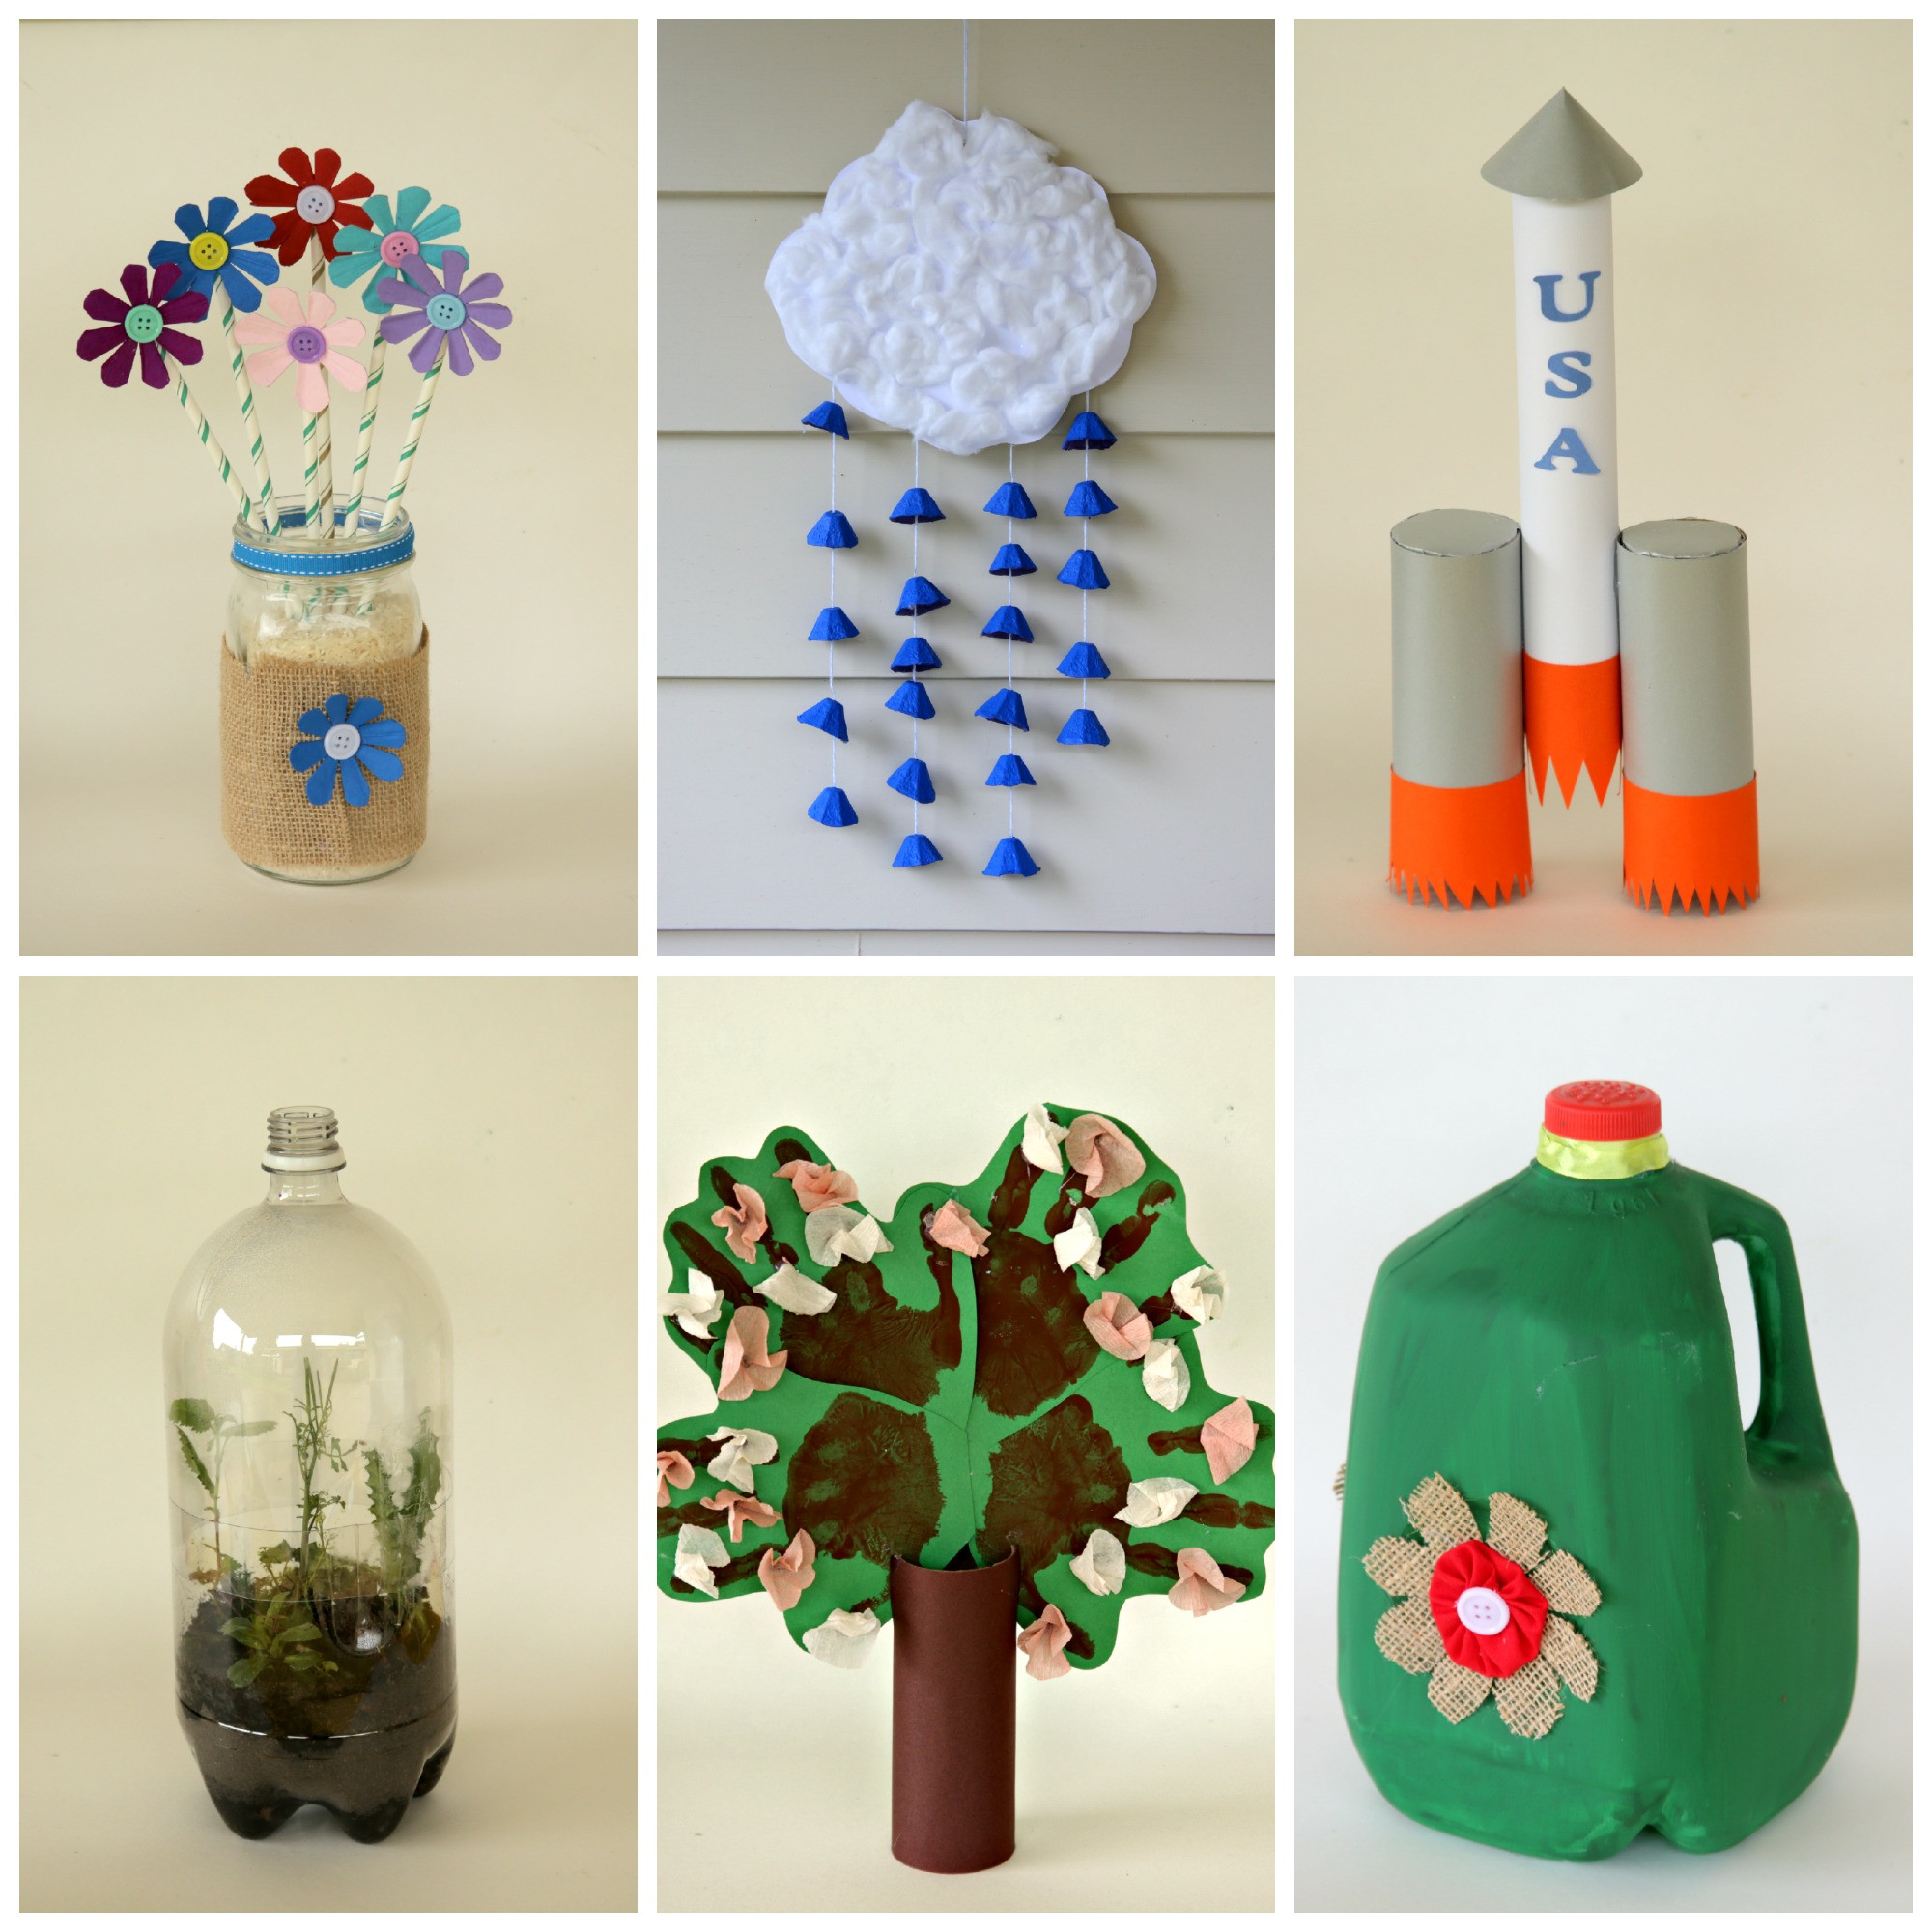 Recycling Craft For Preschoolers
 6 Earth Day Crafts From Recycled Materials · Kix Cereal